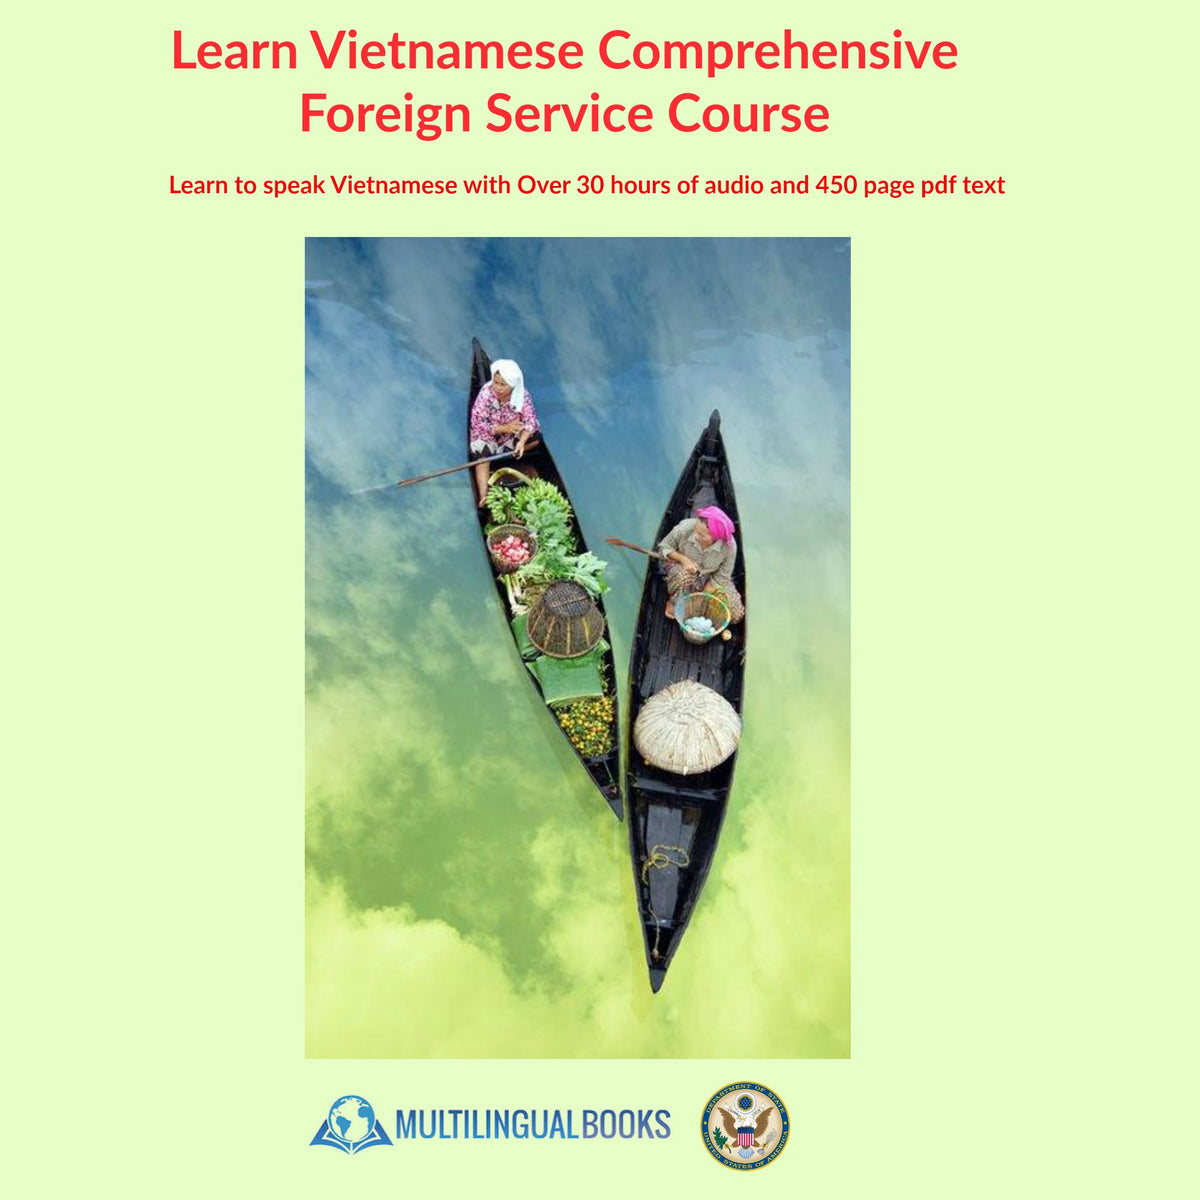 Learn Vietnamese Foreign Service Download